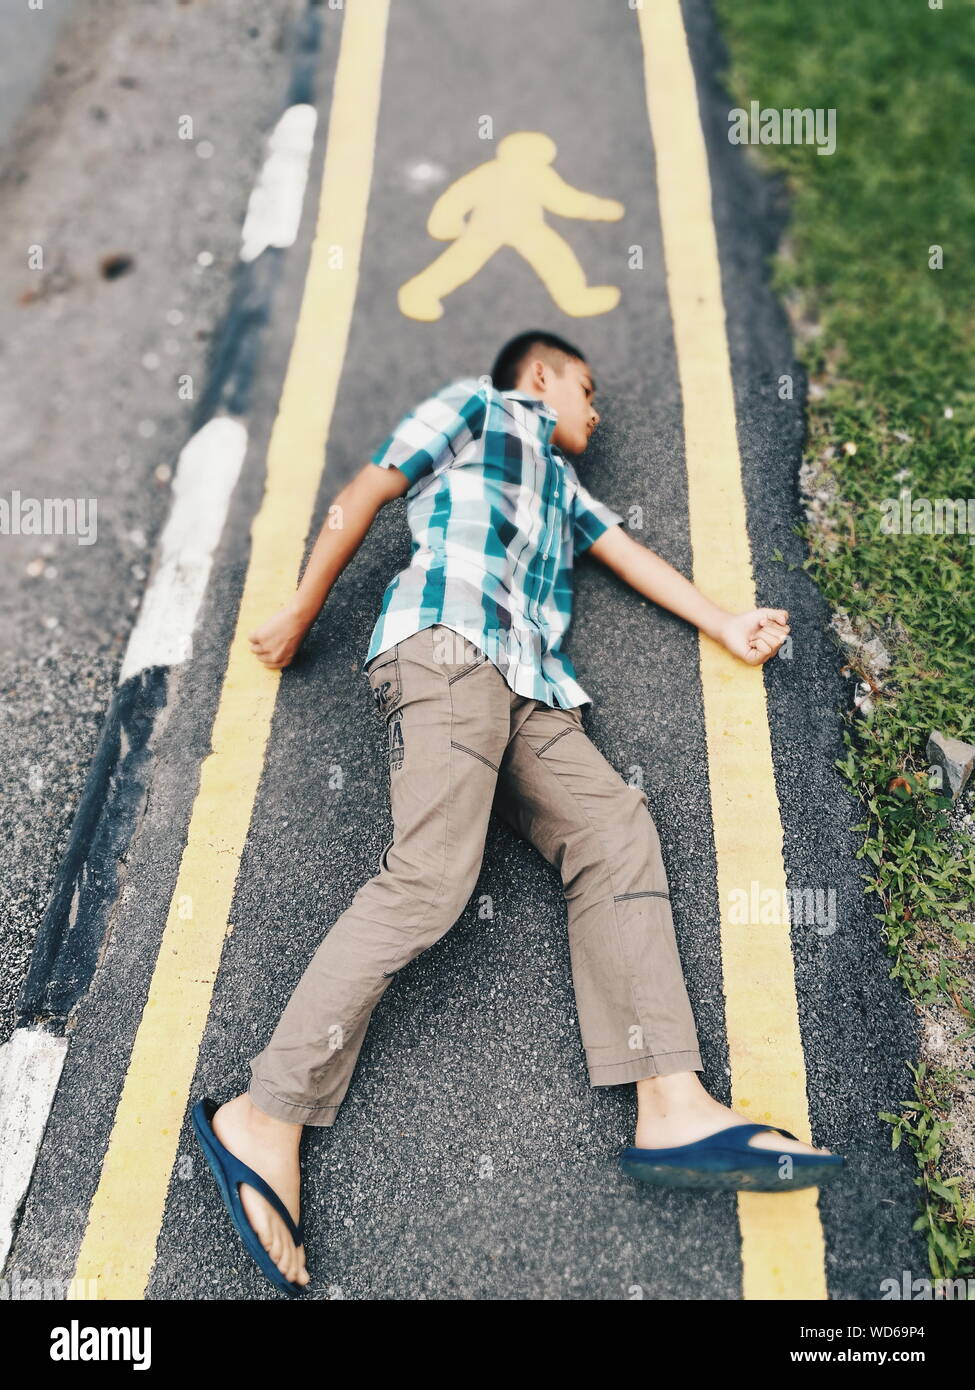 High Angle View Of Boy Imitating Pedestrian Sign On Road Stock Photo